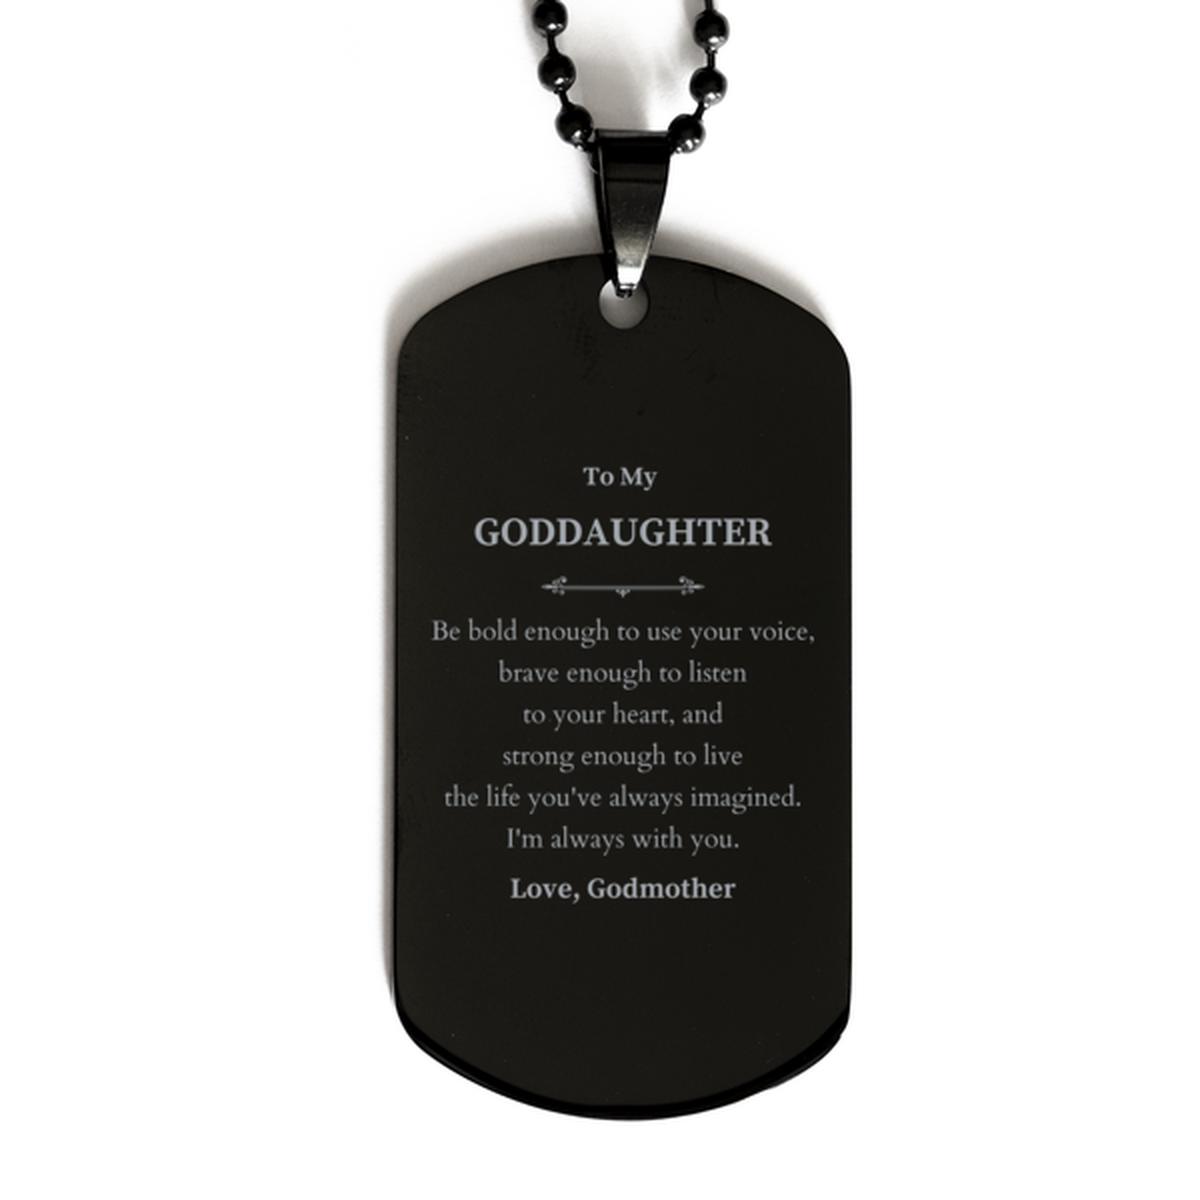 Keepsake Goddaughter Black Dog Tag Gift Idea Graduation Christmas Birthday Goddaughter from Godmother, Goddaughter Be bold enough to use your voice, brave enough to listen to your heart. Love, Godmother